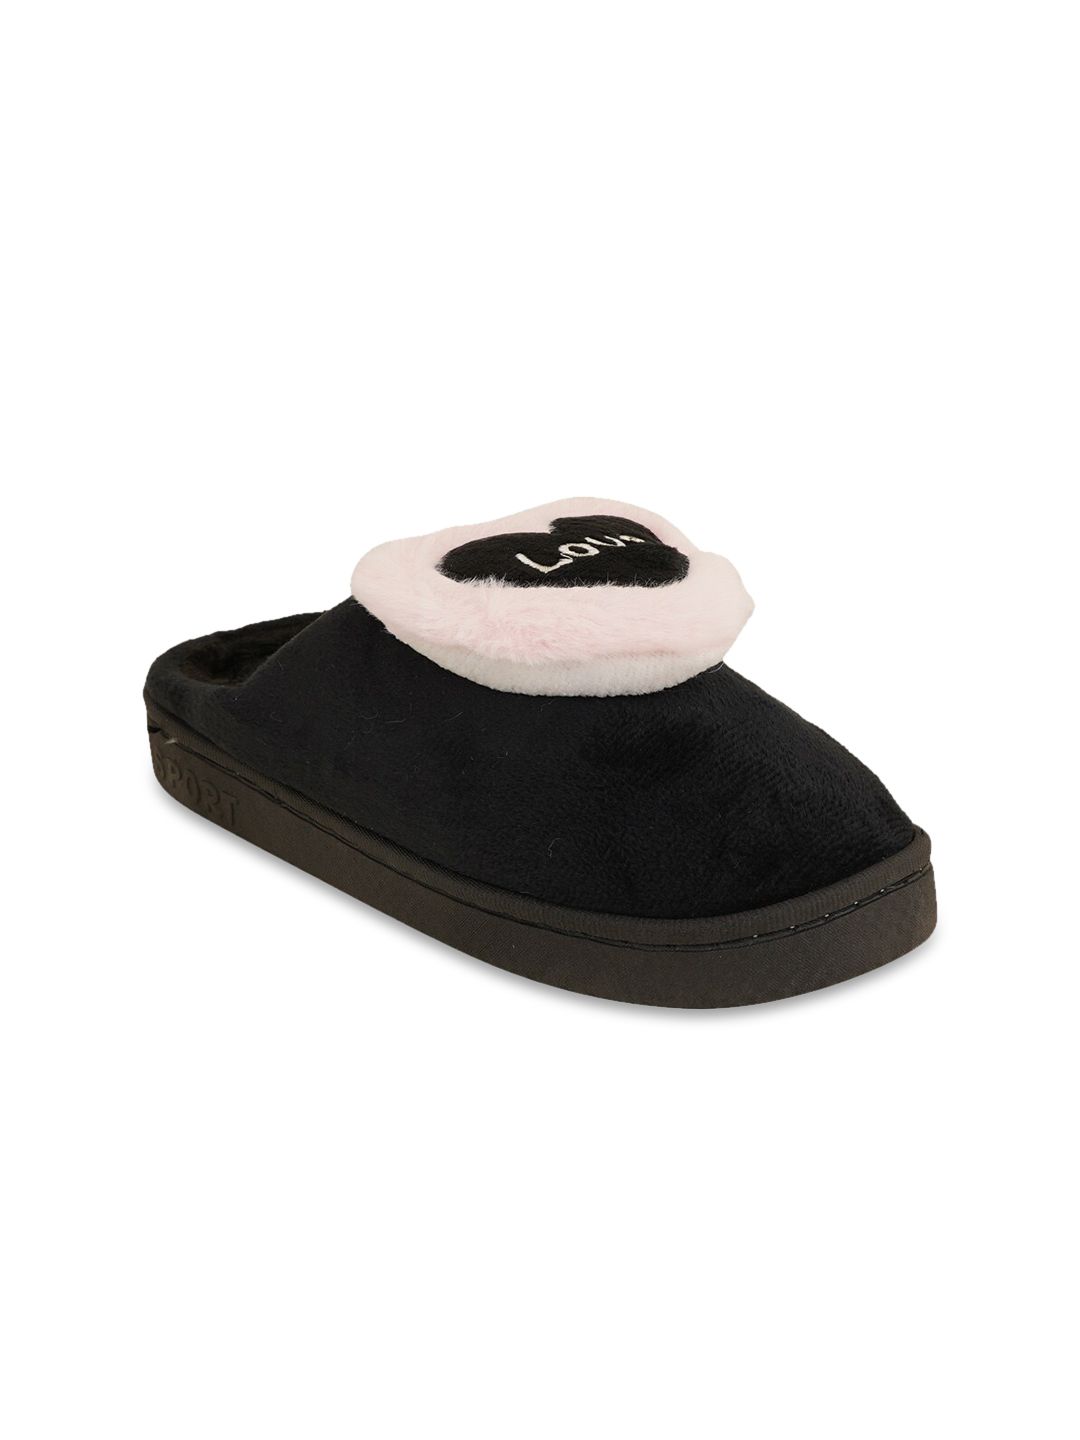 SAPATOS Women Black & White Printed Room Slippers Price in India